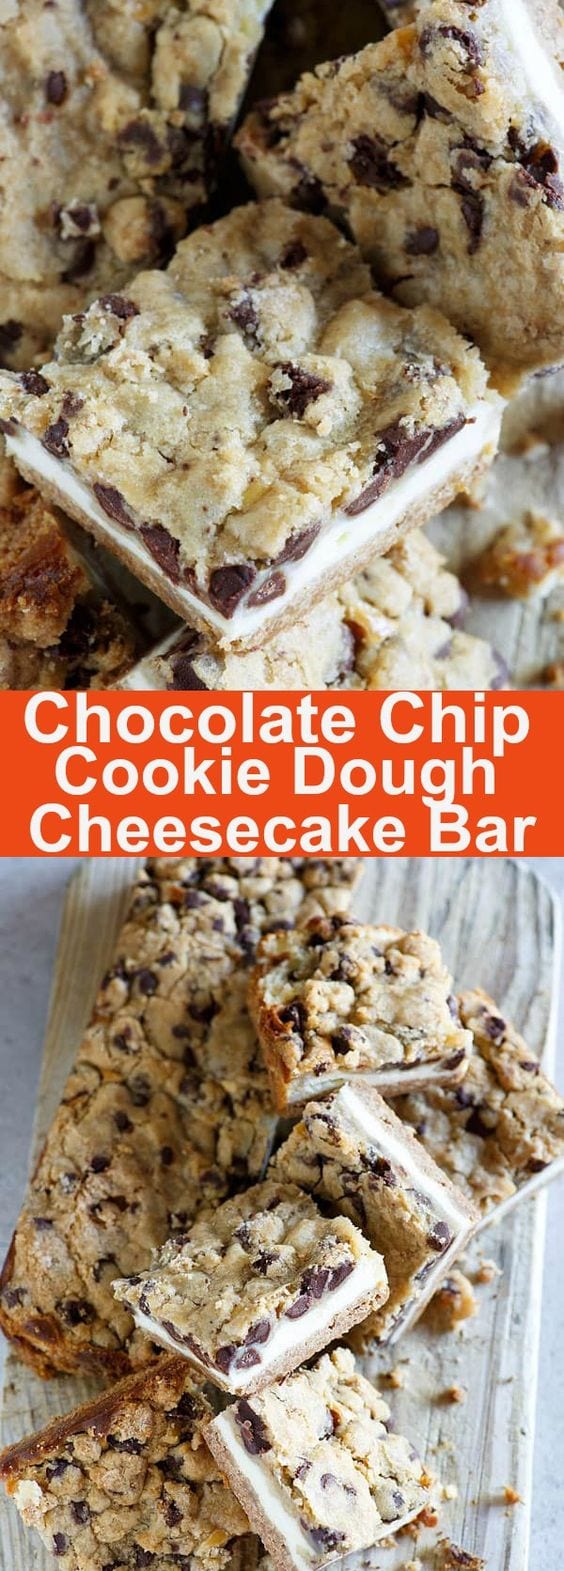 Chocolate Chip Cookie Dough Cheesecake Bar - BEST cheesecake bar EVER with chocolate chips, cookie dough and cheesecake, every bite is sinfully sweet | rasamalaysia.com